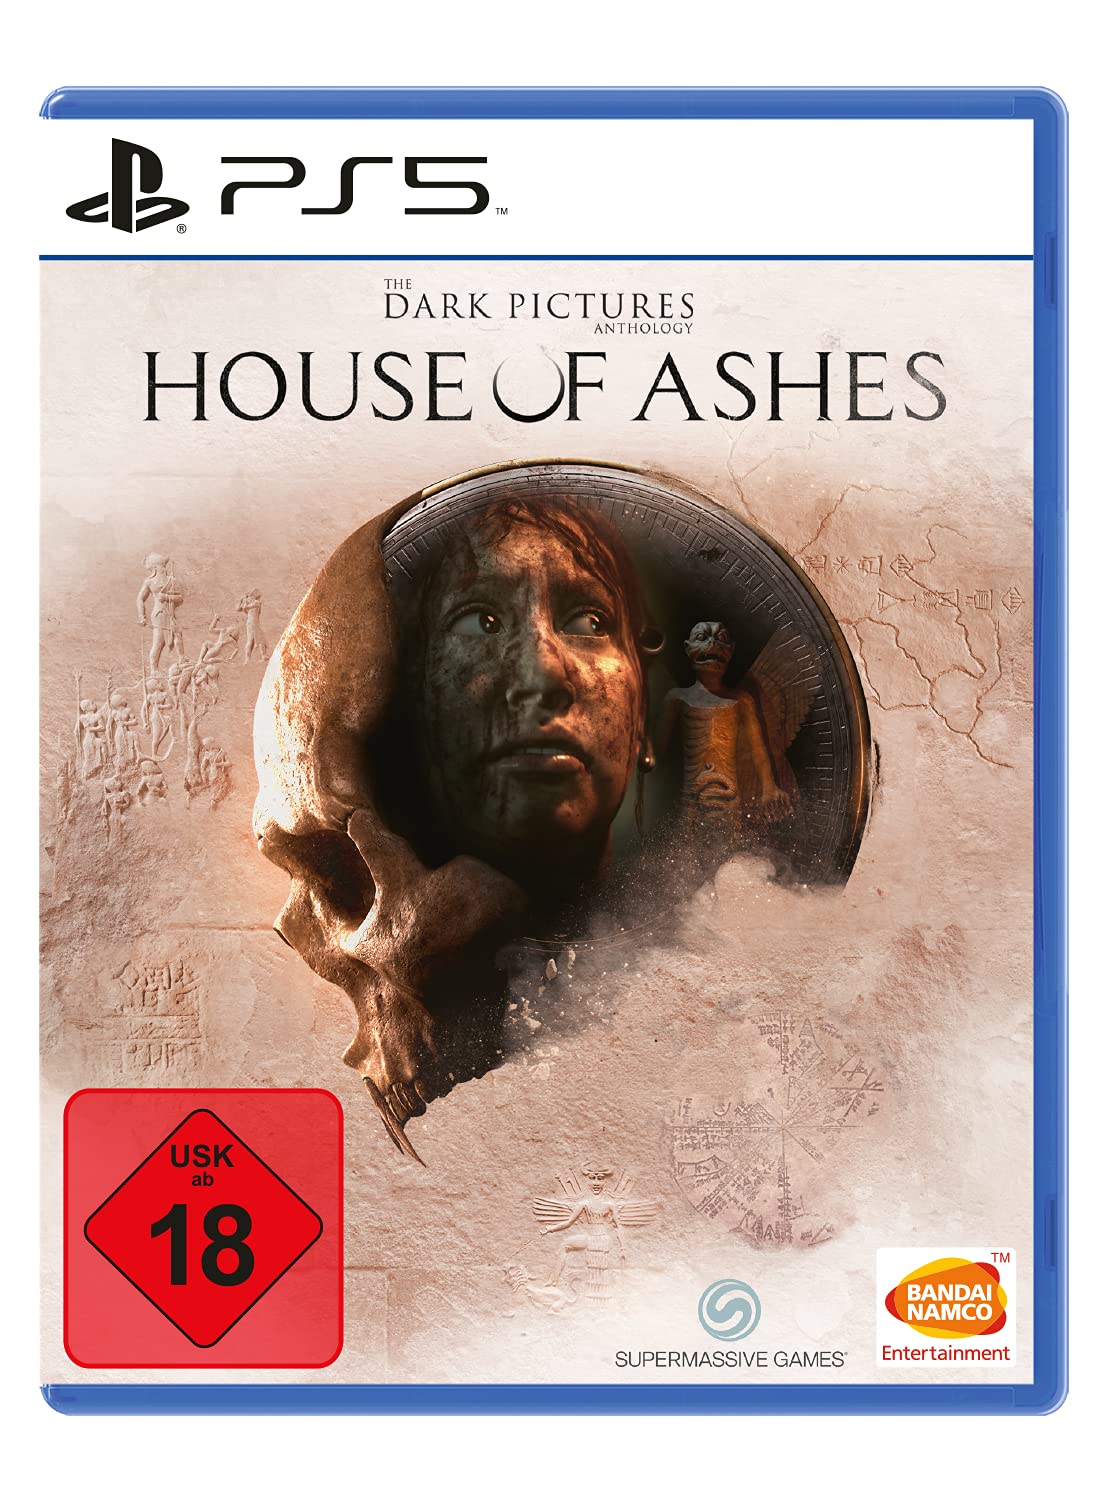 The Dark Pictures Anthology: House of Ashes - [PS5]